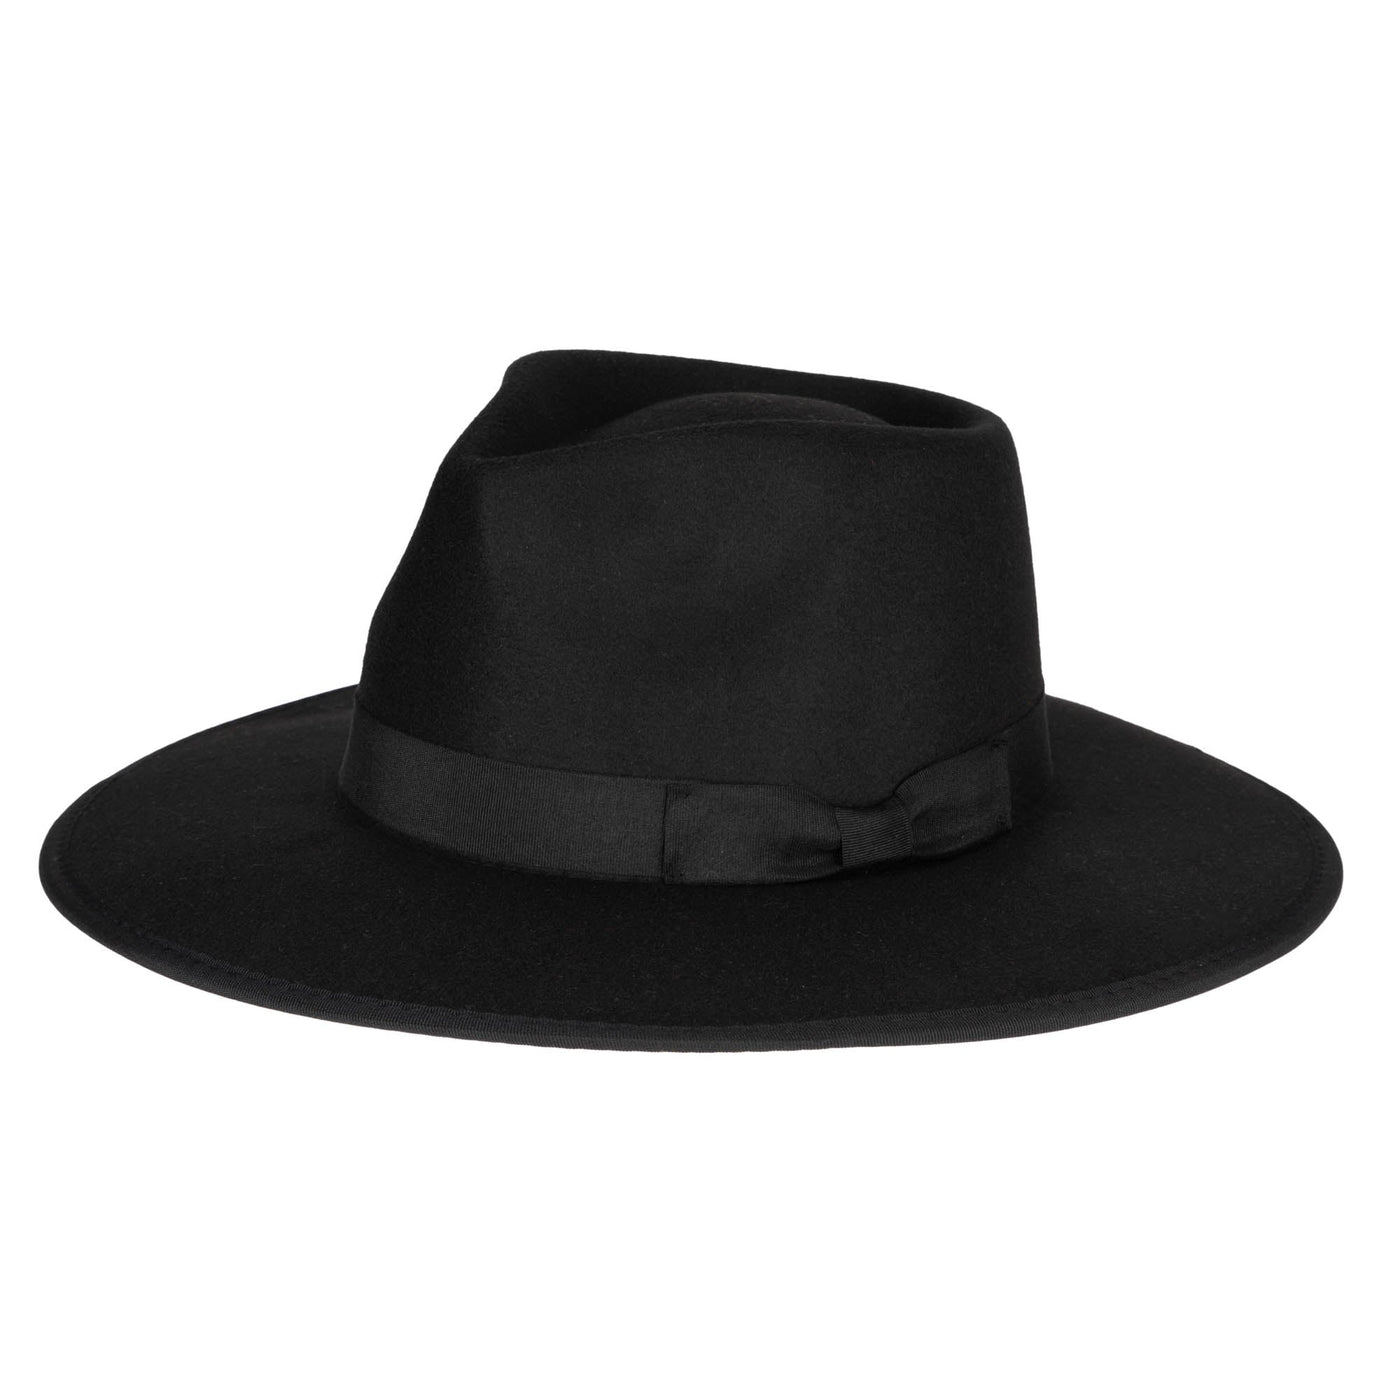 FEDORA - Classic Brim Fedora With Flat Grosgrain Bow And Band